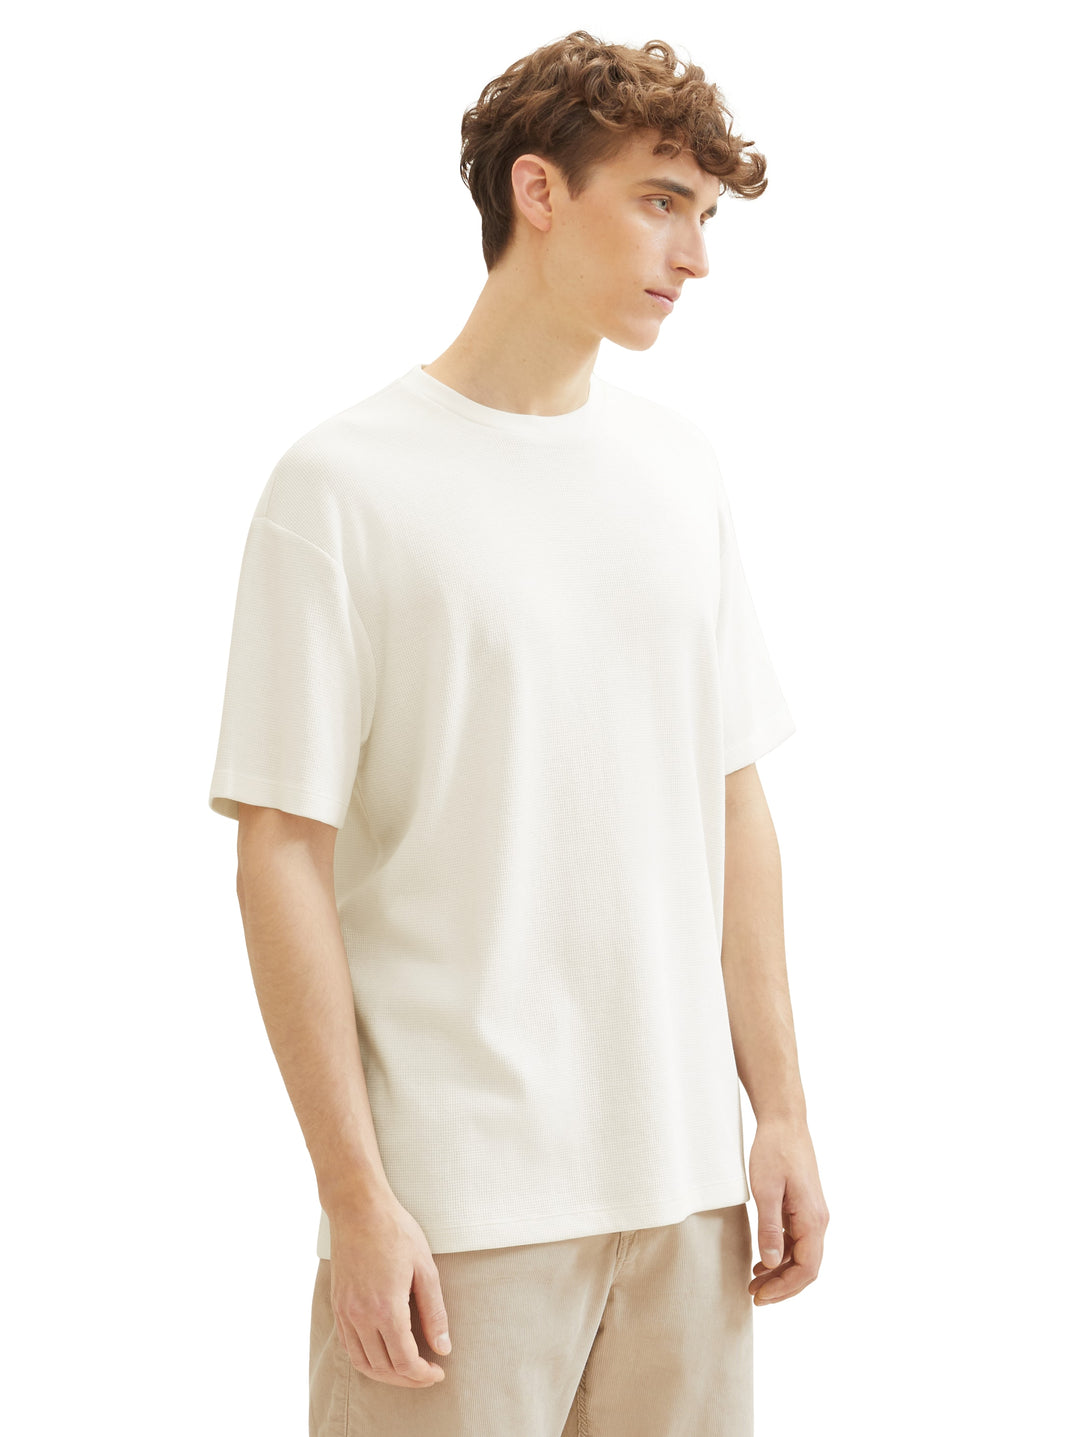 RELAXED STRUCTURED T-SHIRT